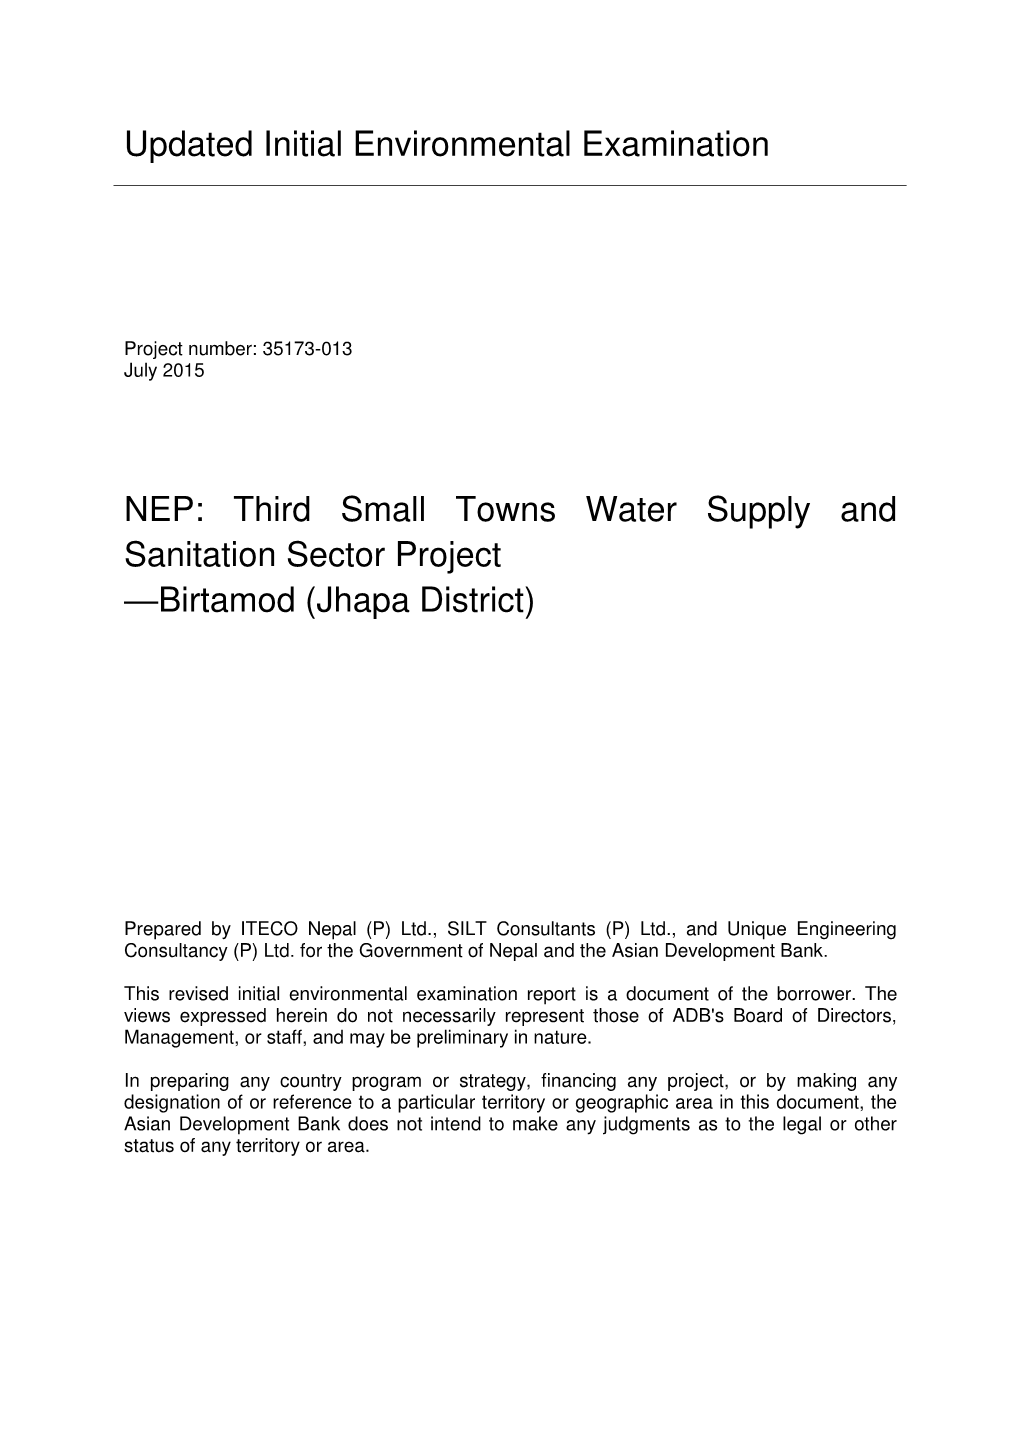 35173-013: Third Small Towns Water Supply and Sanitation Sector Projec